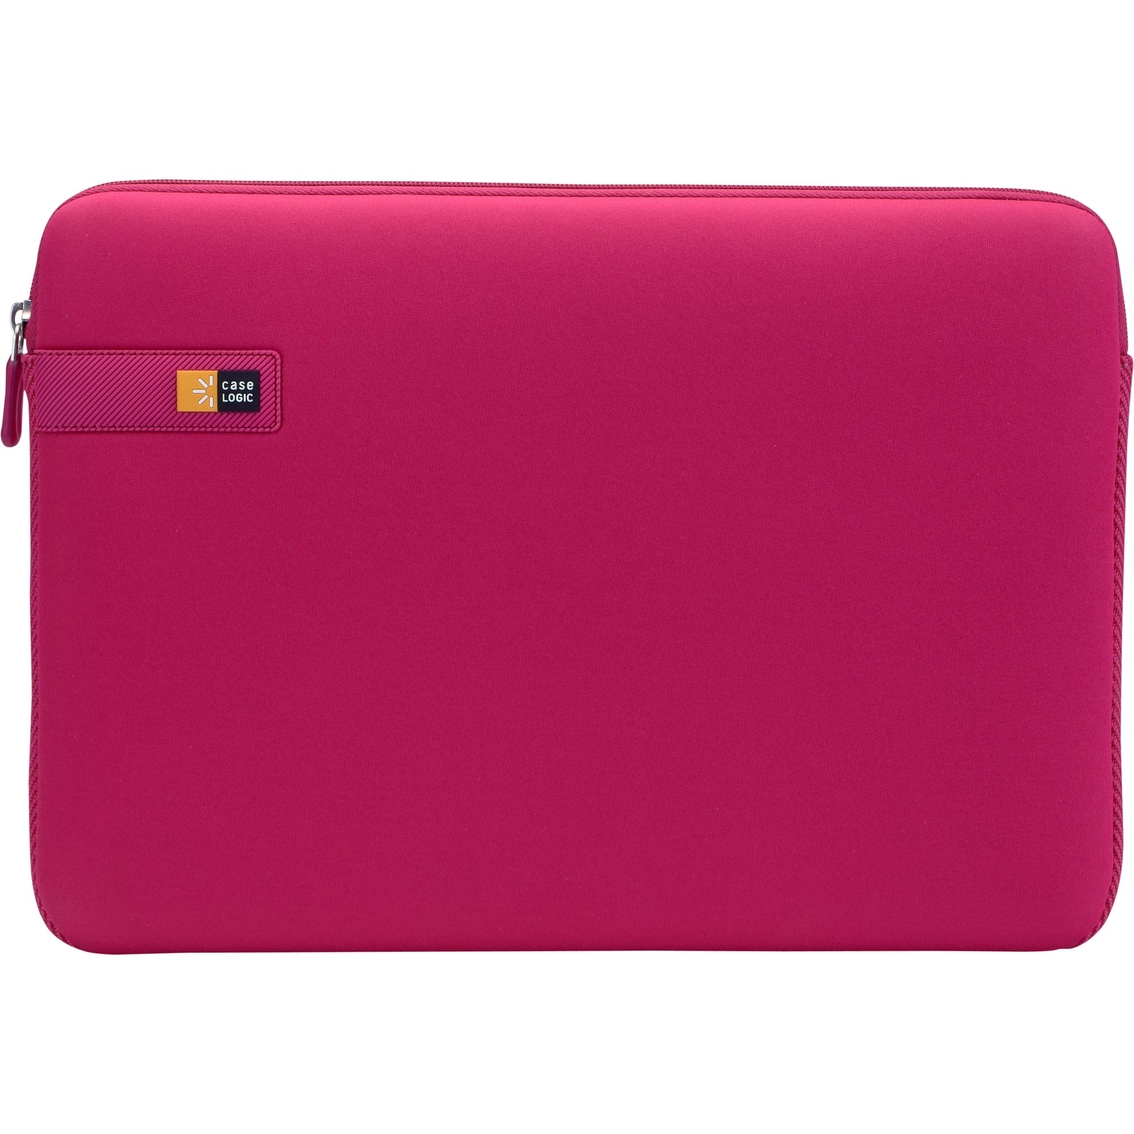 Case 15-16 In. Laptop Sleeve | Sleeves & Cases | Electronics | Shop The Exchange